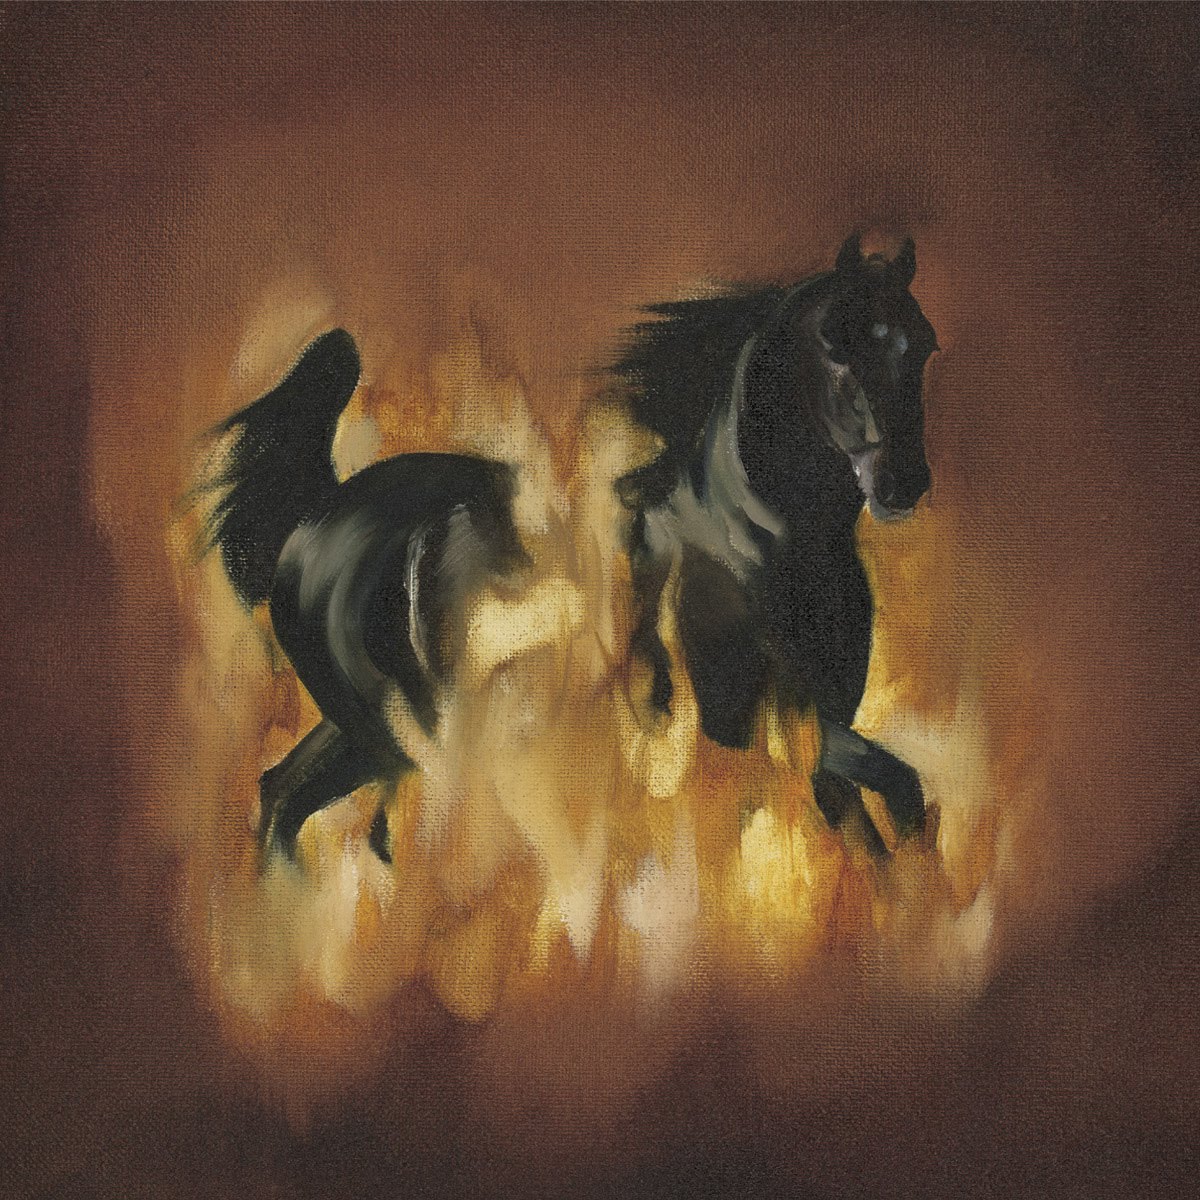 The Besnard Lakes Are the Dark Horse is out now.